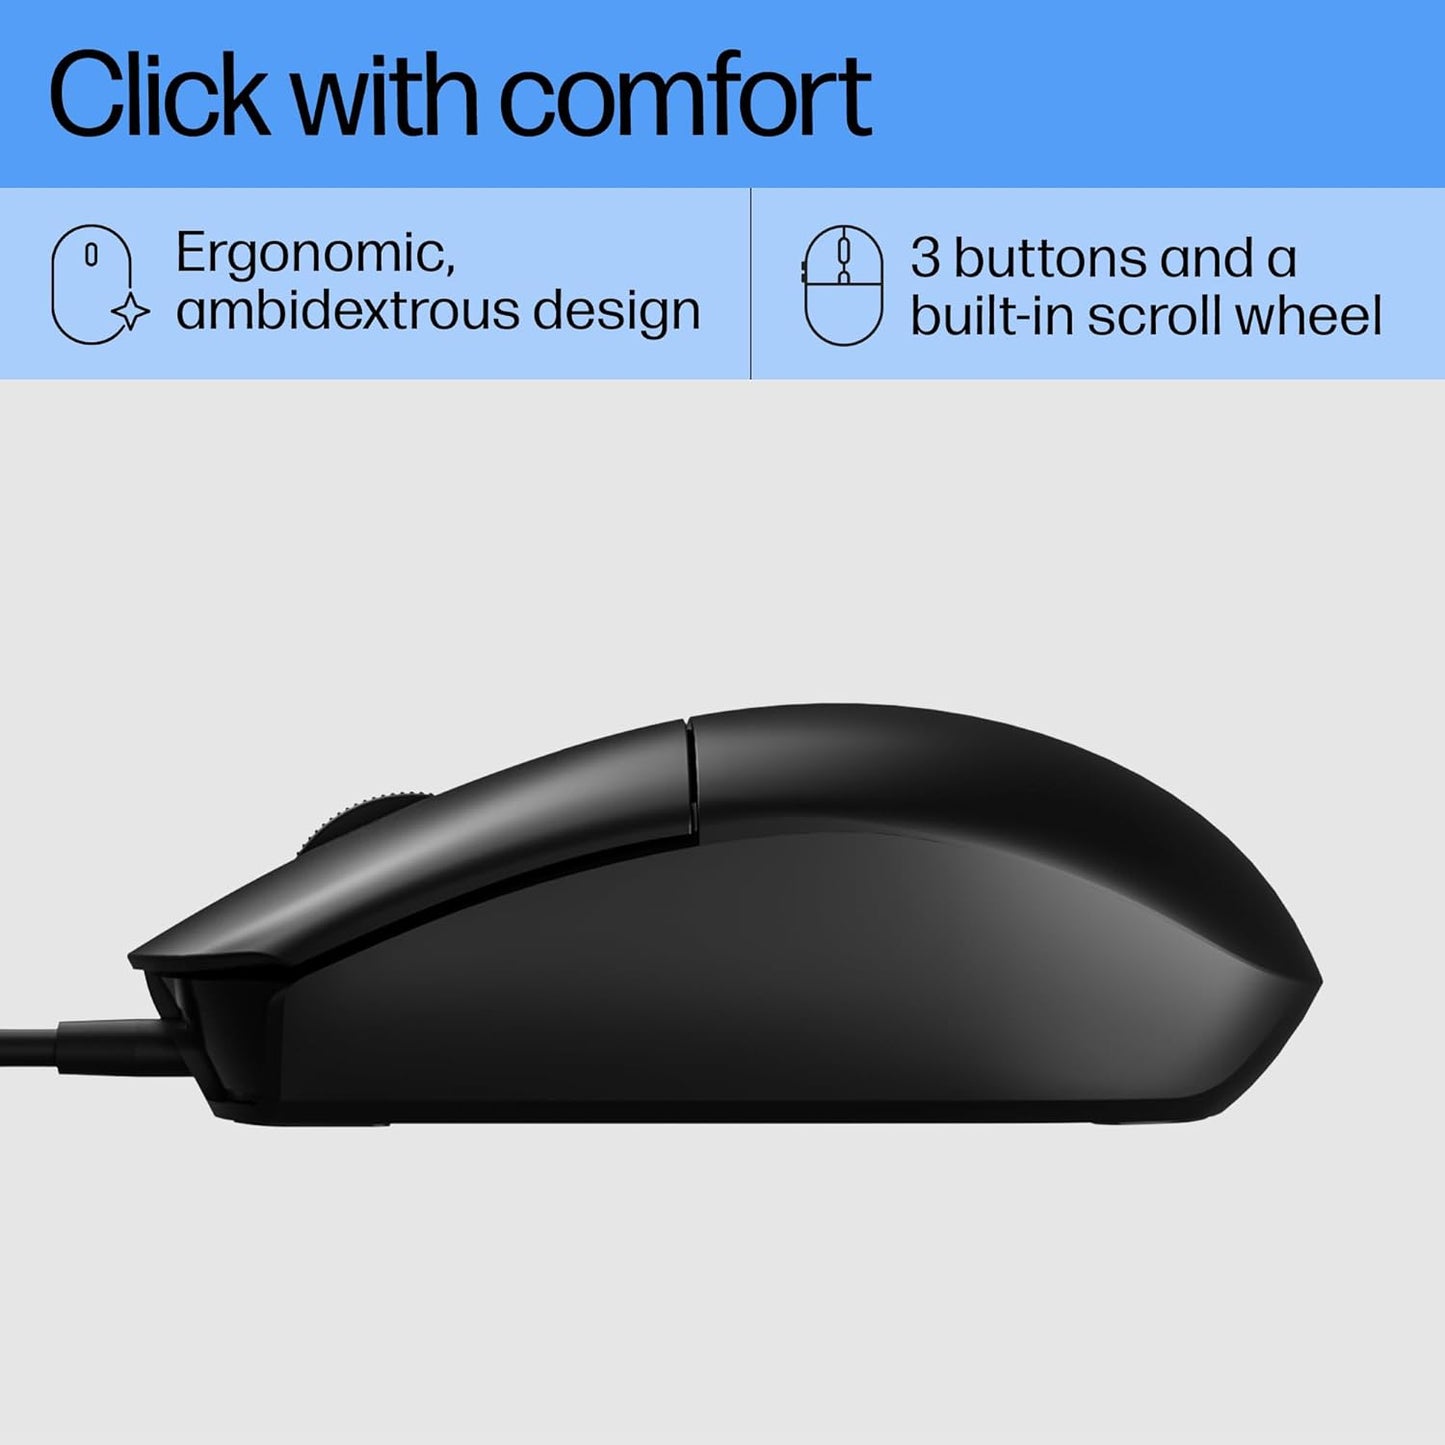 HP M070 Ergonomic Wired Mouse with 1600 DPI and 3 Years Warranty